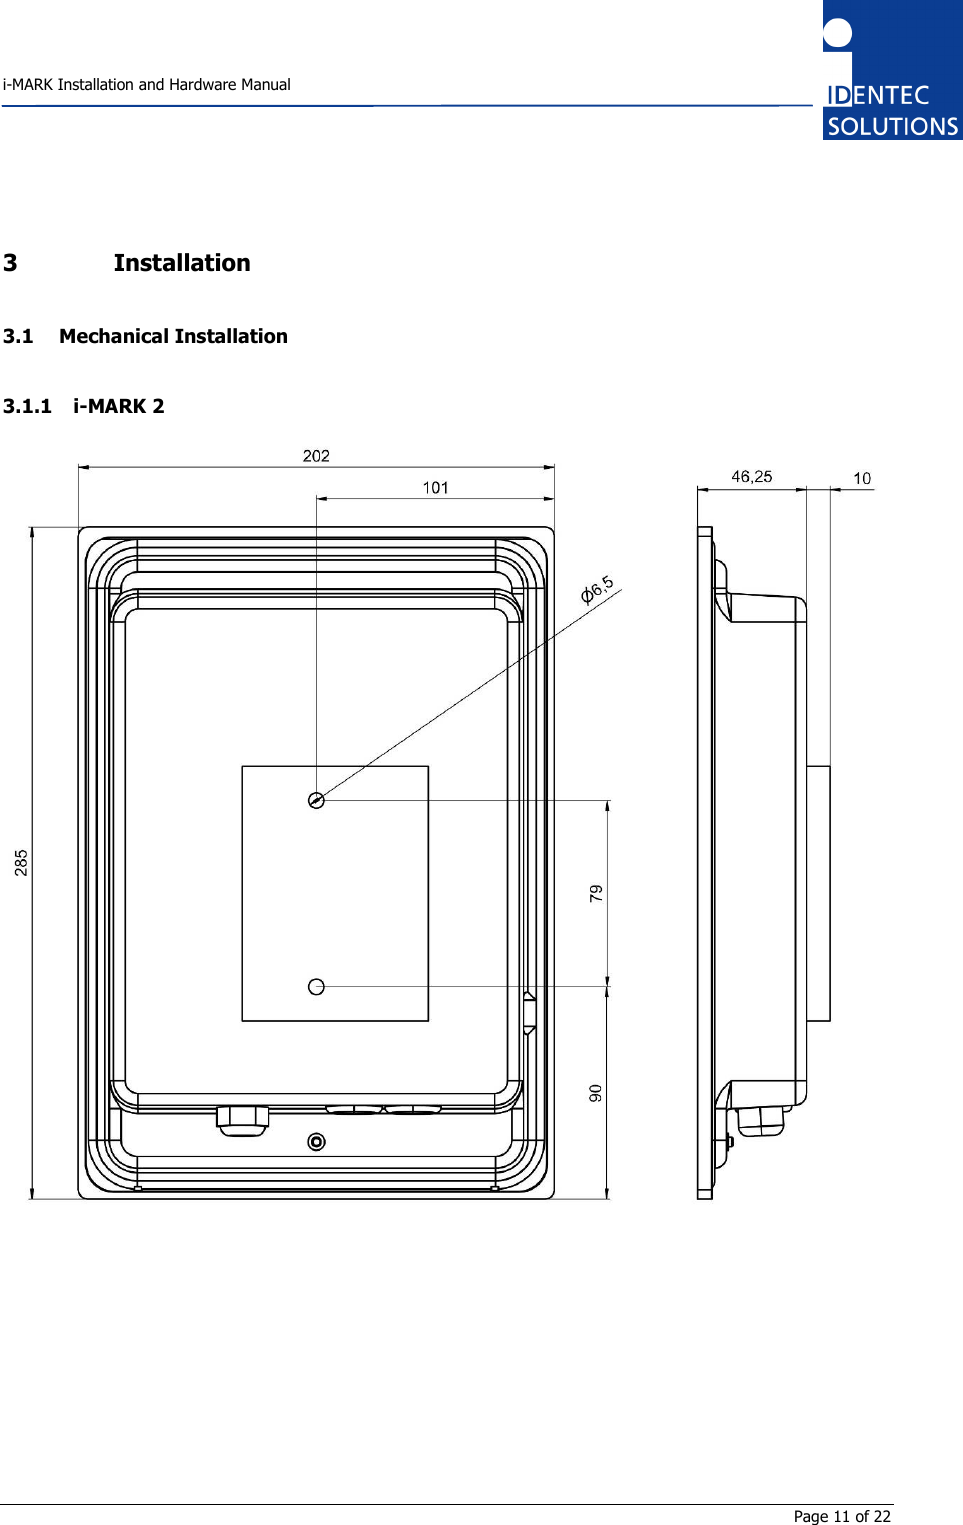    i-MARK Installation and Hardware Manual       Page 11 of 22 3 Installation 3.1 Mechanical Installation 3.1.1 i-MARK 2    